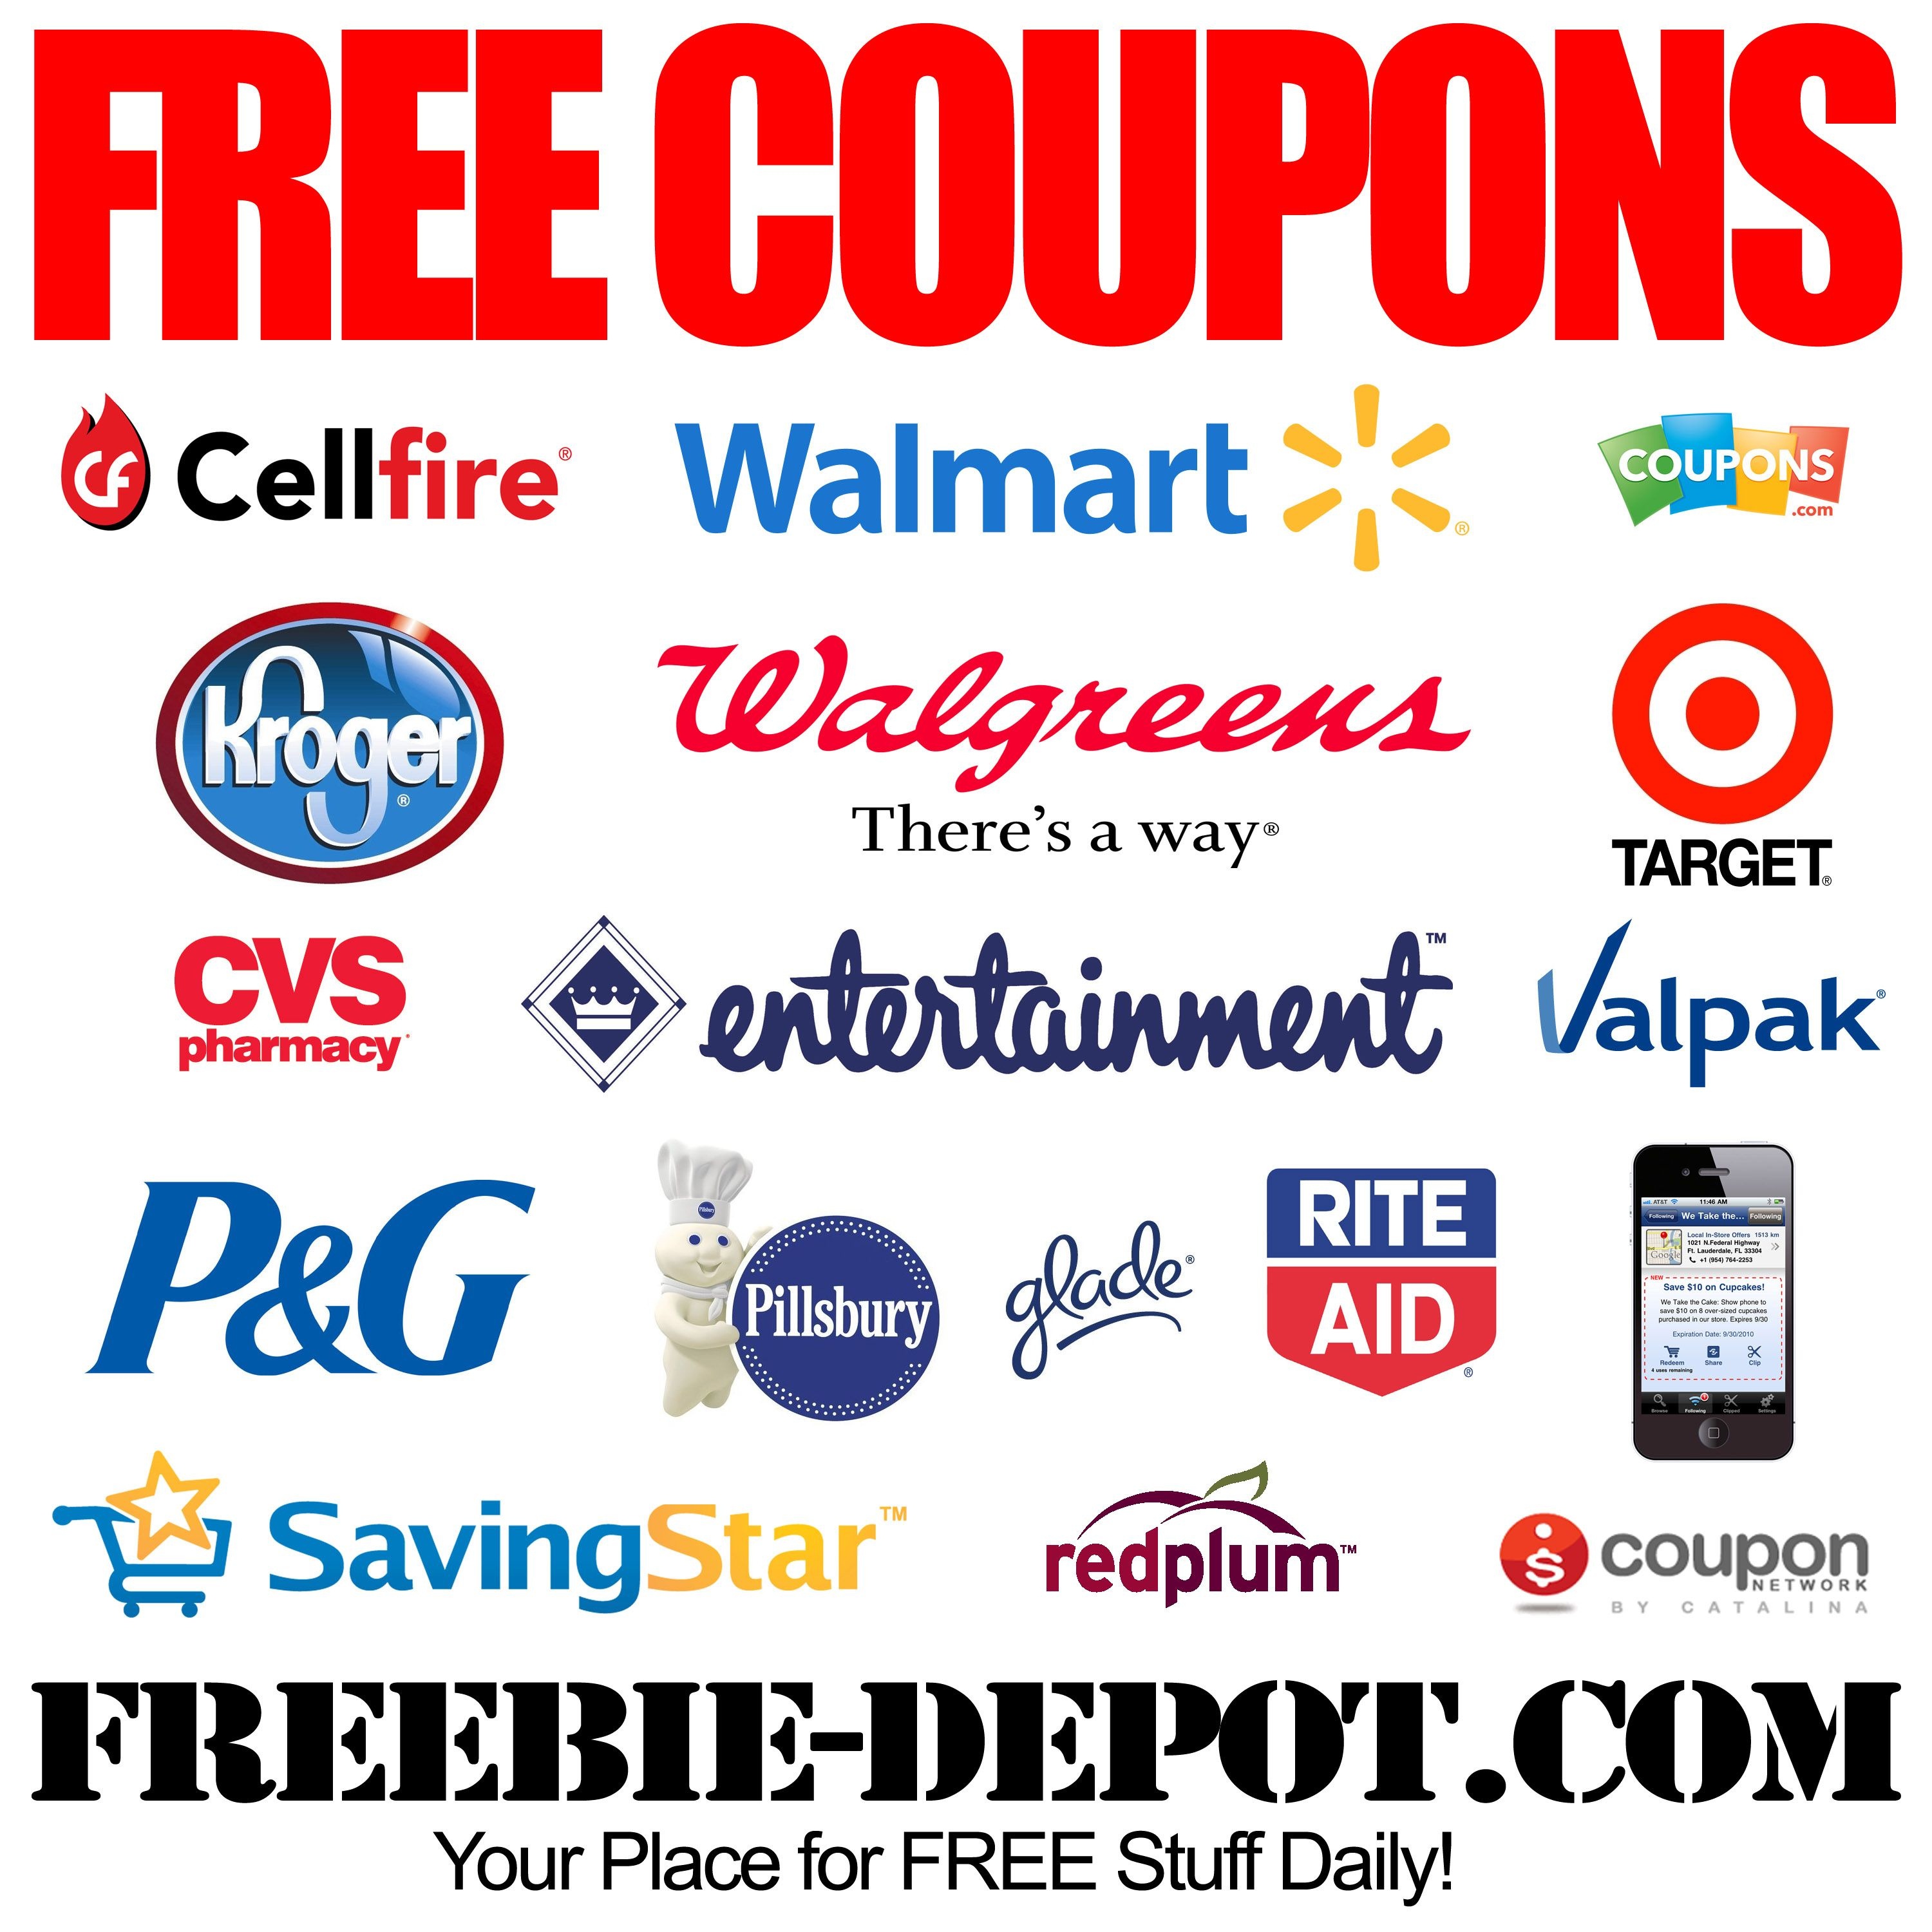 Free Coupons Free Printable Coupons Free Grocery Coupons Free Printable Coupons Without Downloading Or Registering 